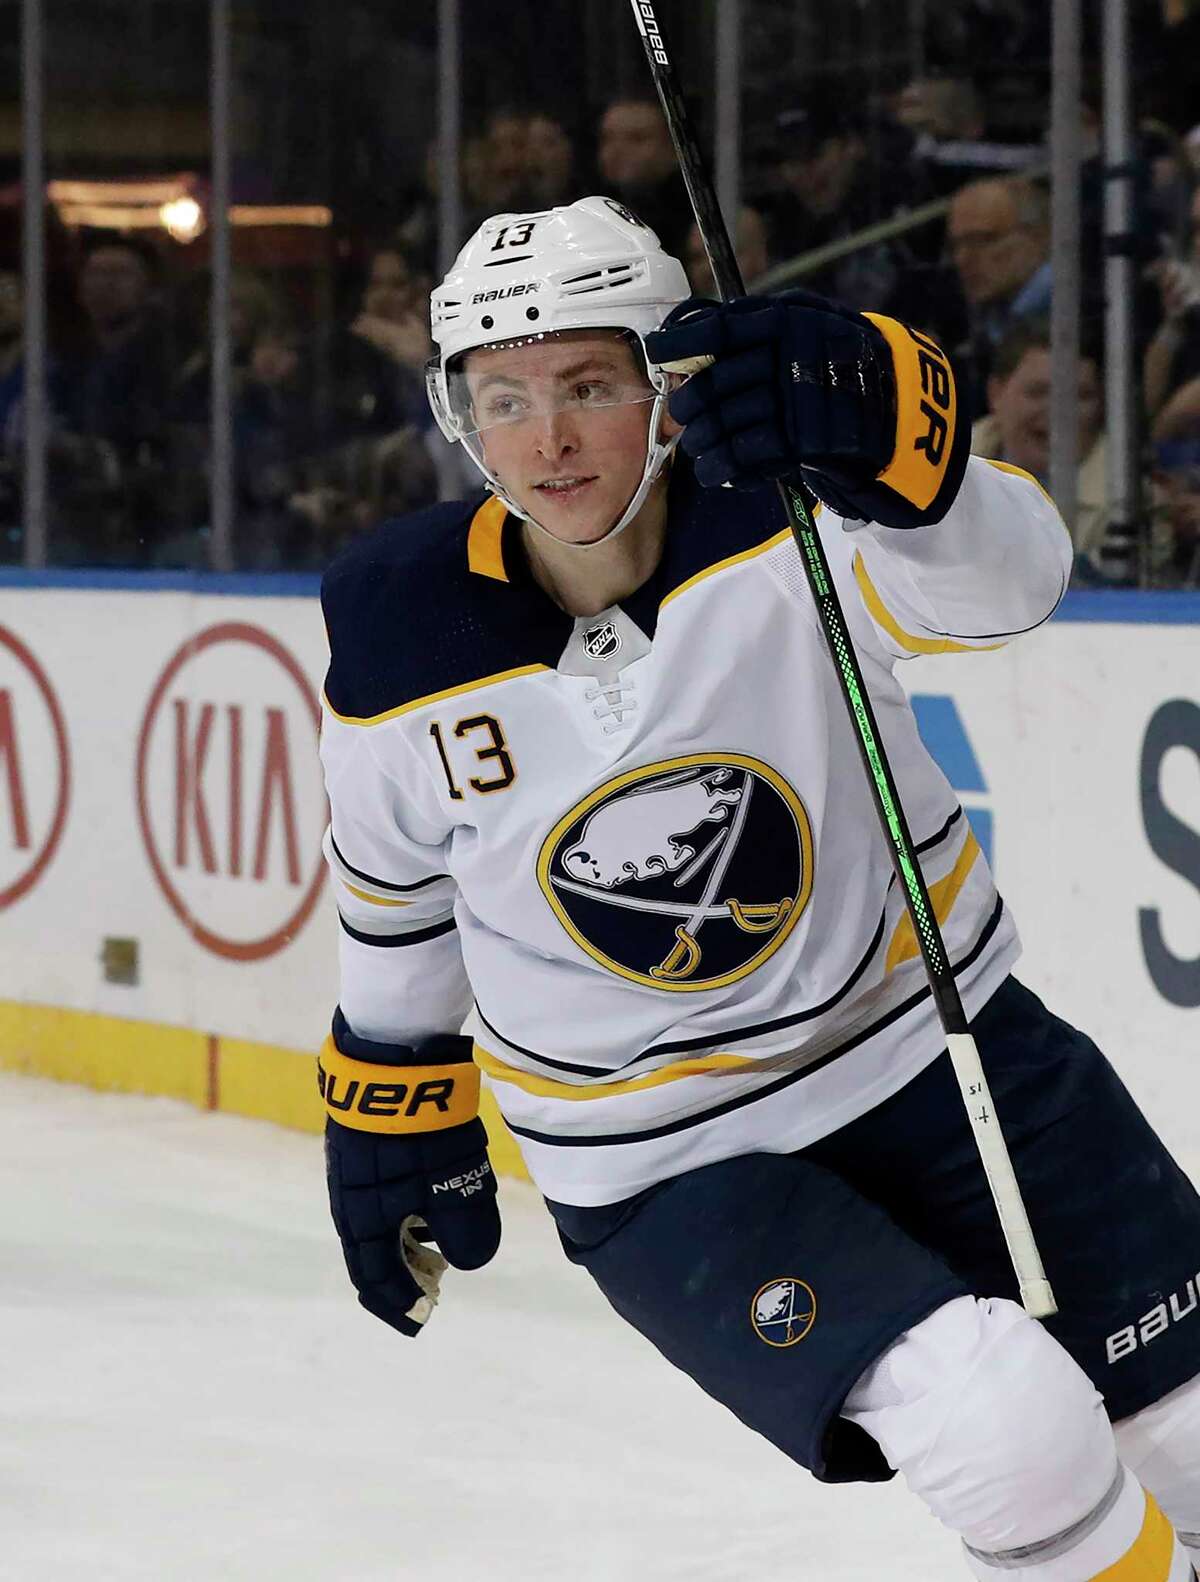 Buffalo Sabres left wing Jimmy Vesey (13) celebrates after scoring a goal during the third period of an NHL hockey game agains the New York Rangers, Friday, Feb. 7, 2020, in New York. (AP Photo/Jim McIsaac)